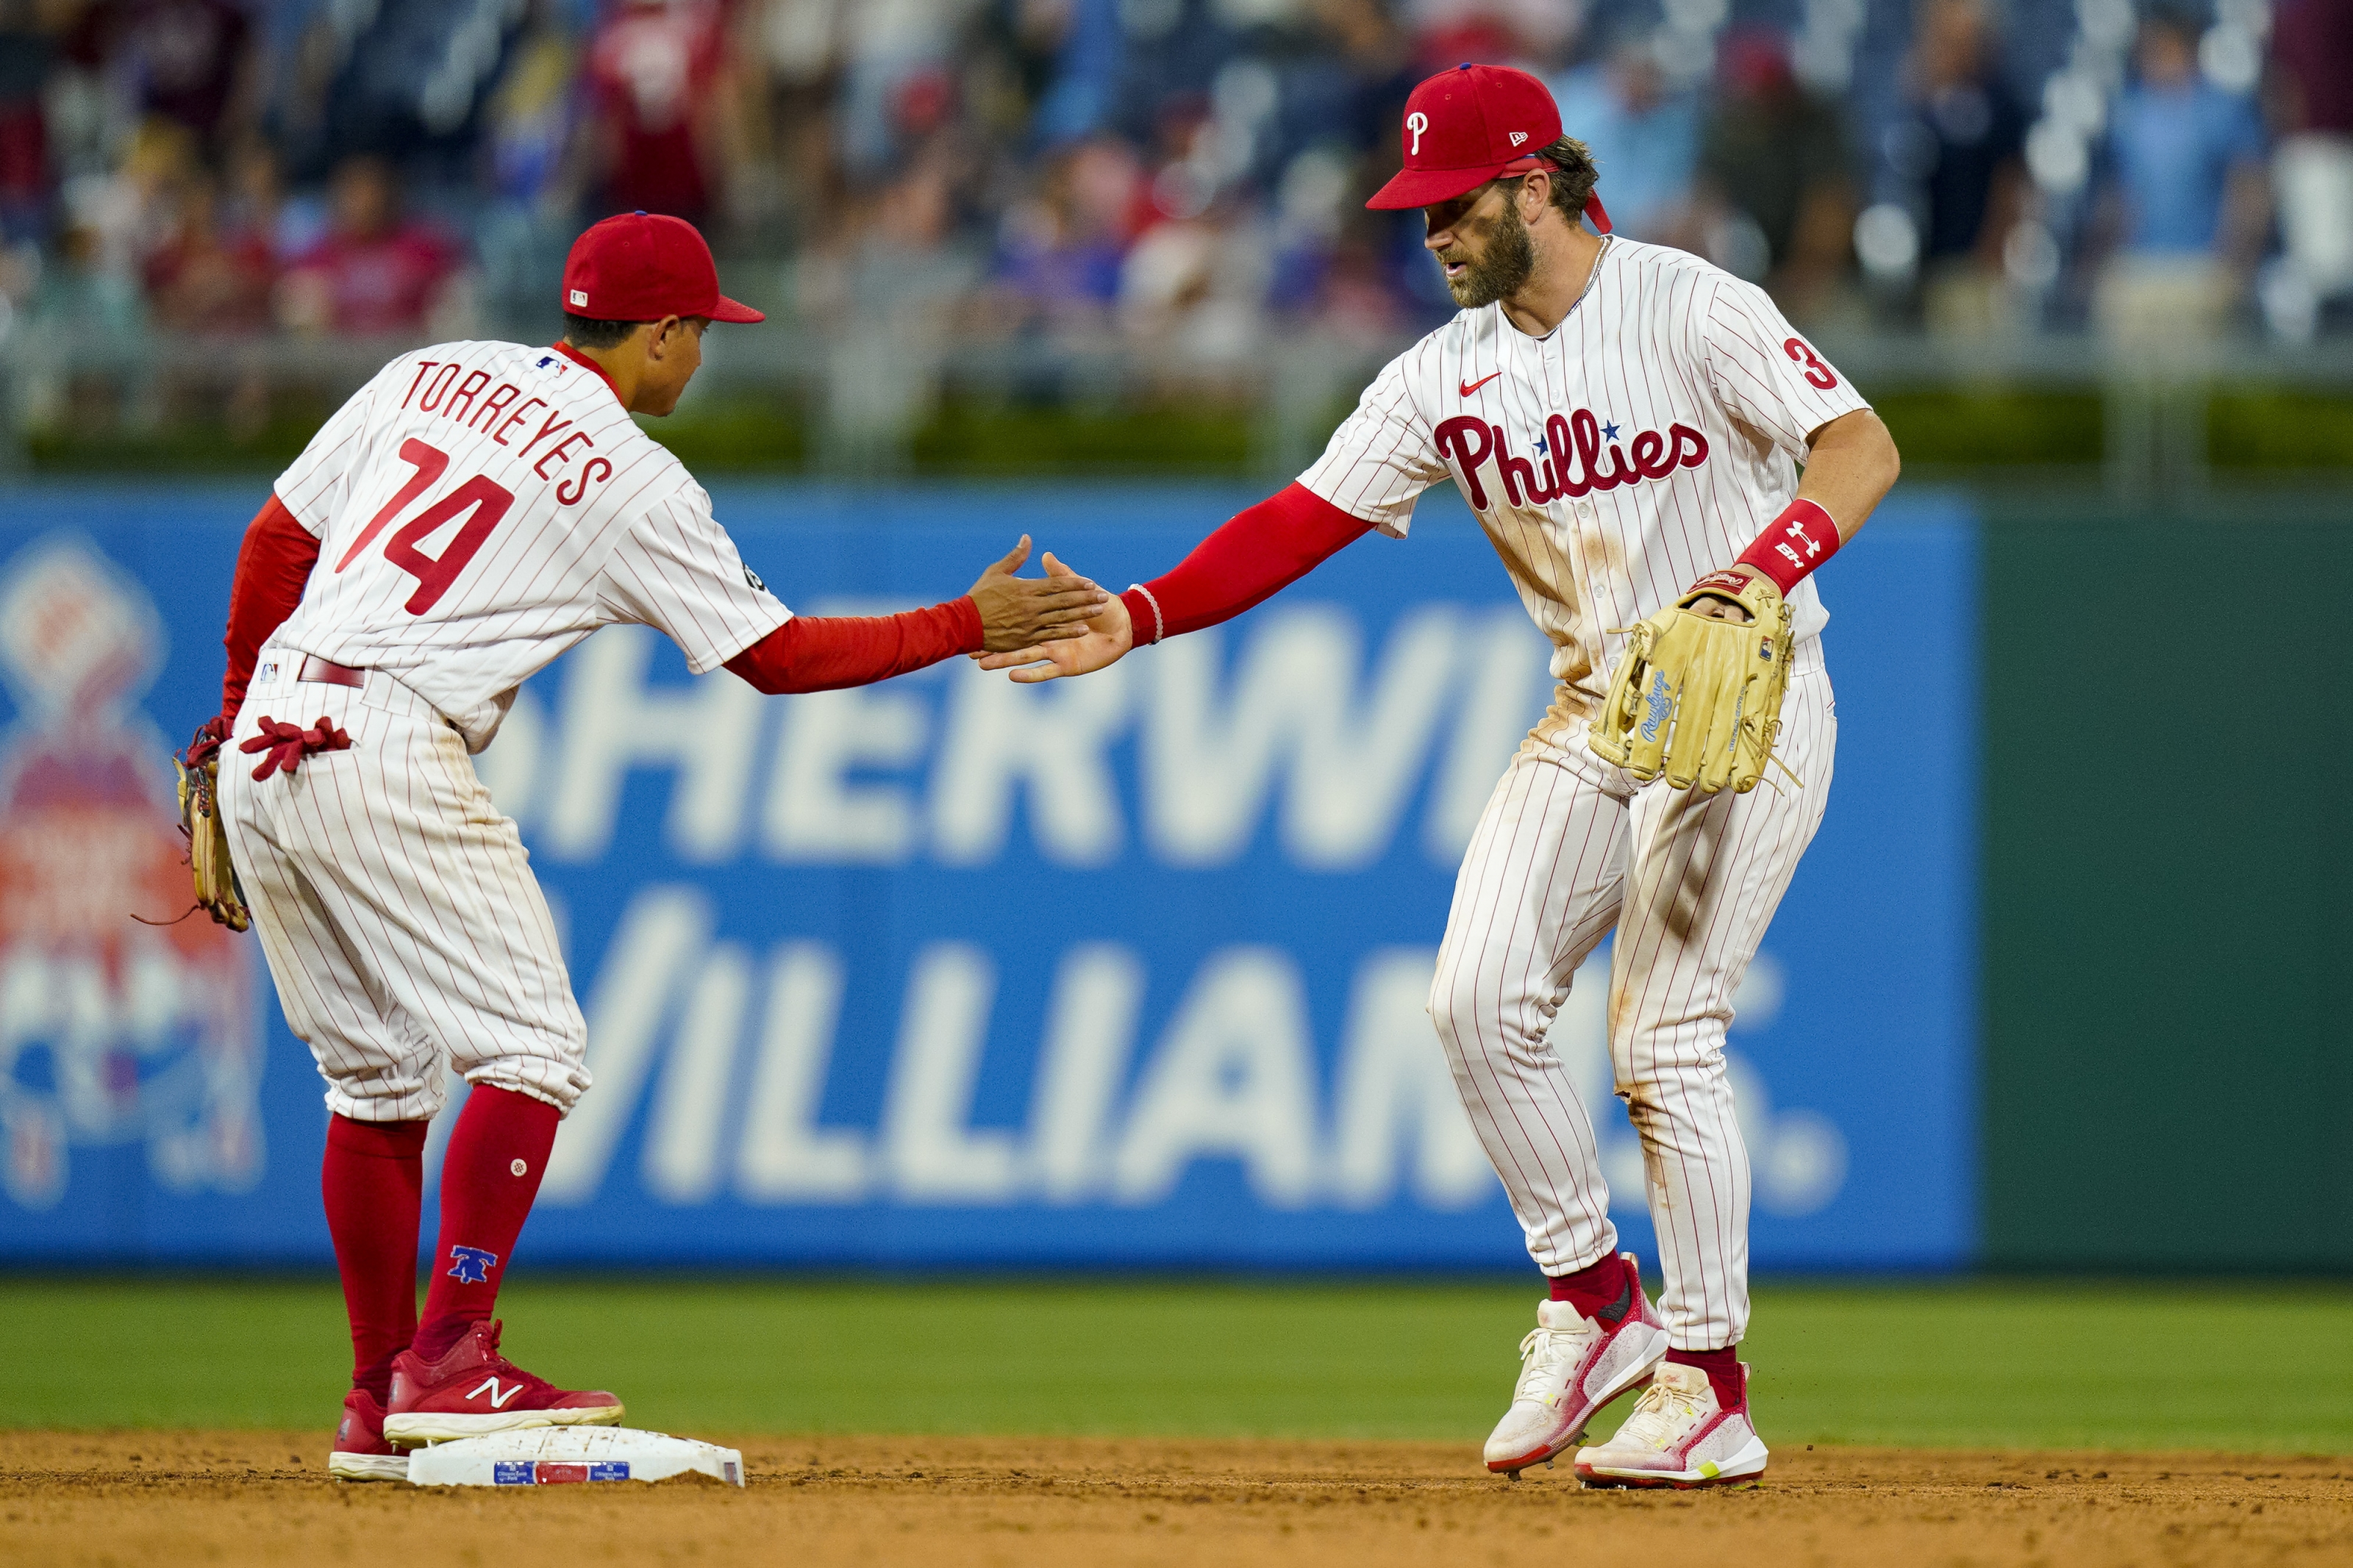 Rhys Hoskins aiming to get activated from IL this week